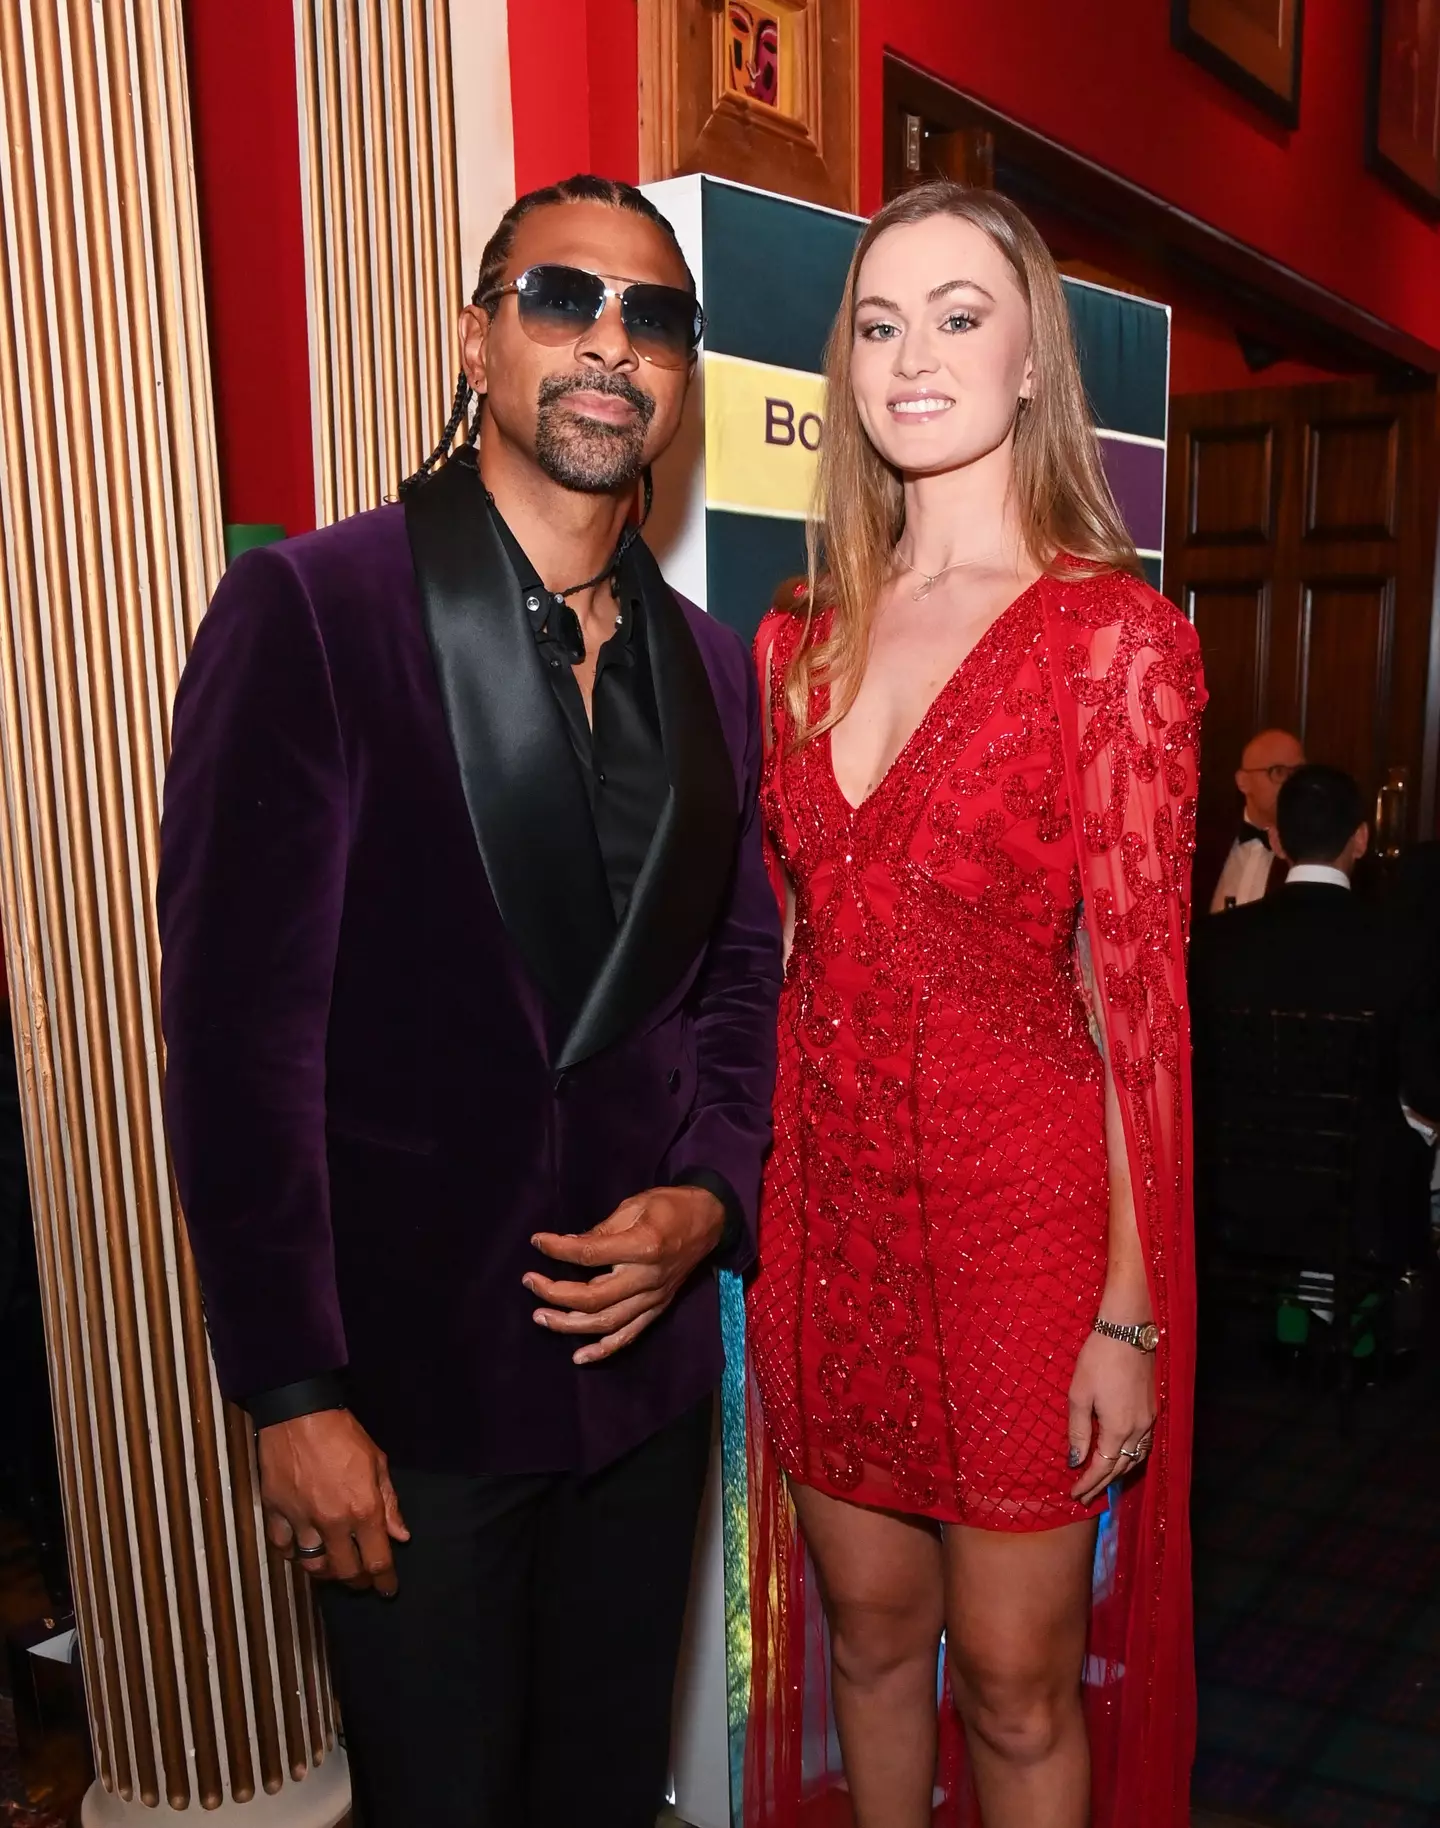 David Haye and Sian Osborne have been open about 'expanding' their relationship.